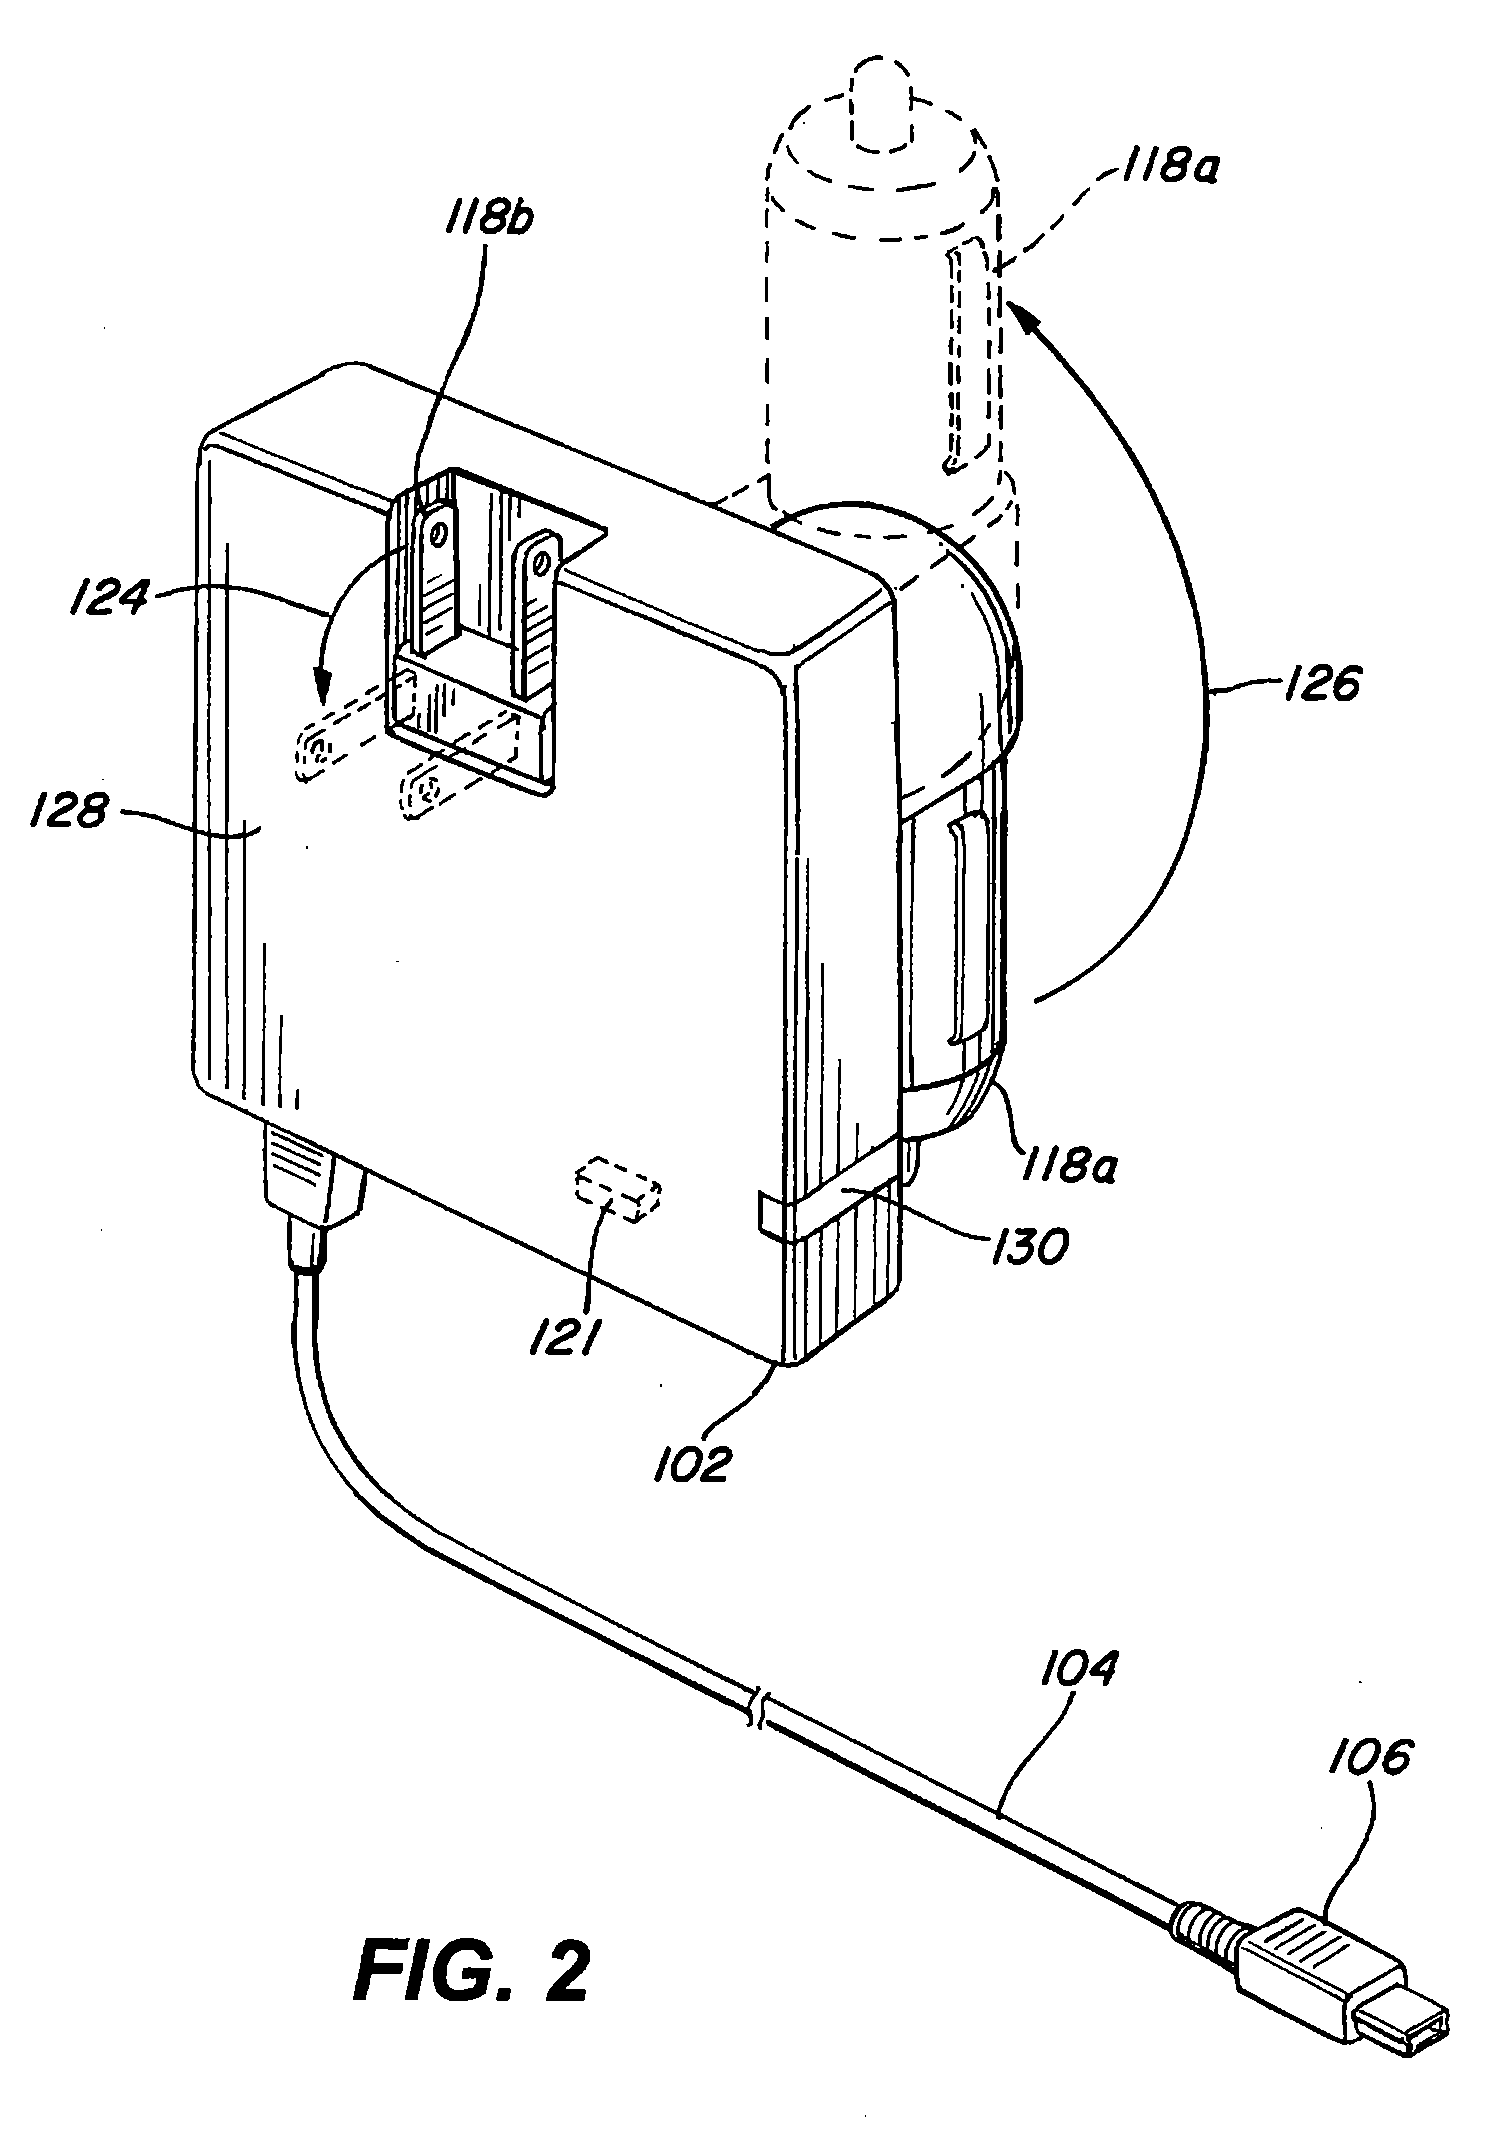 Method and apparatus for recharging batteries in a more efficient manner